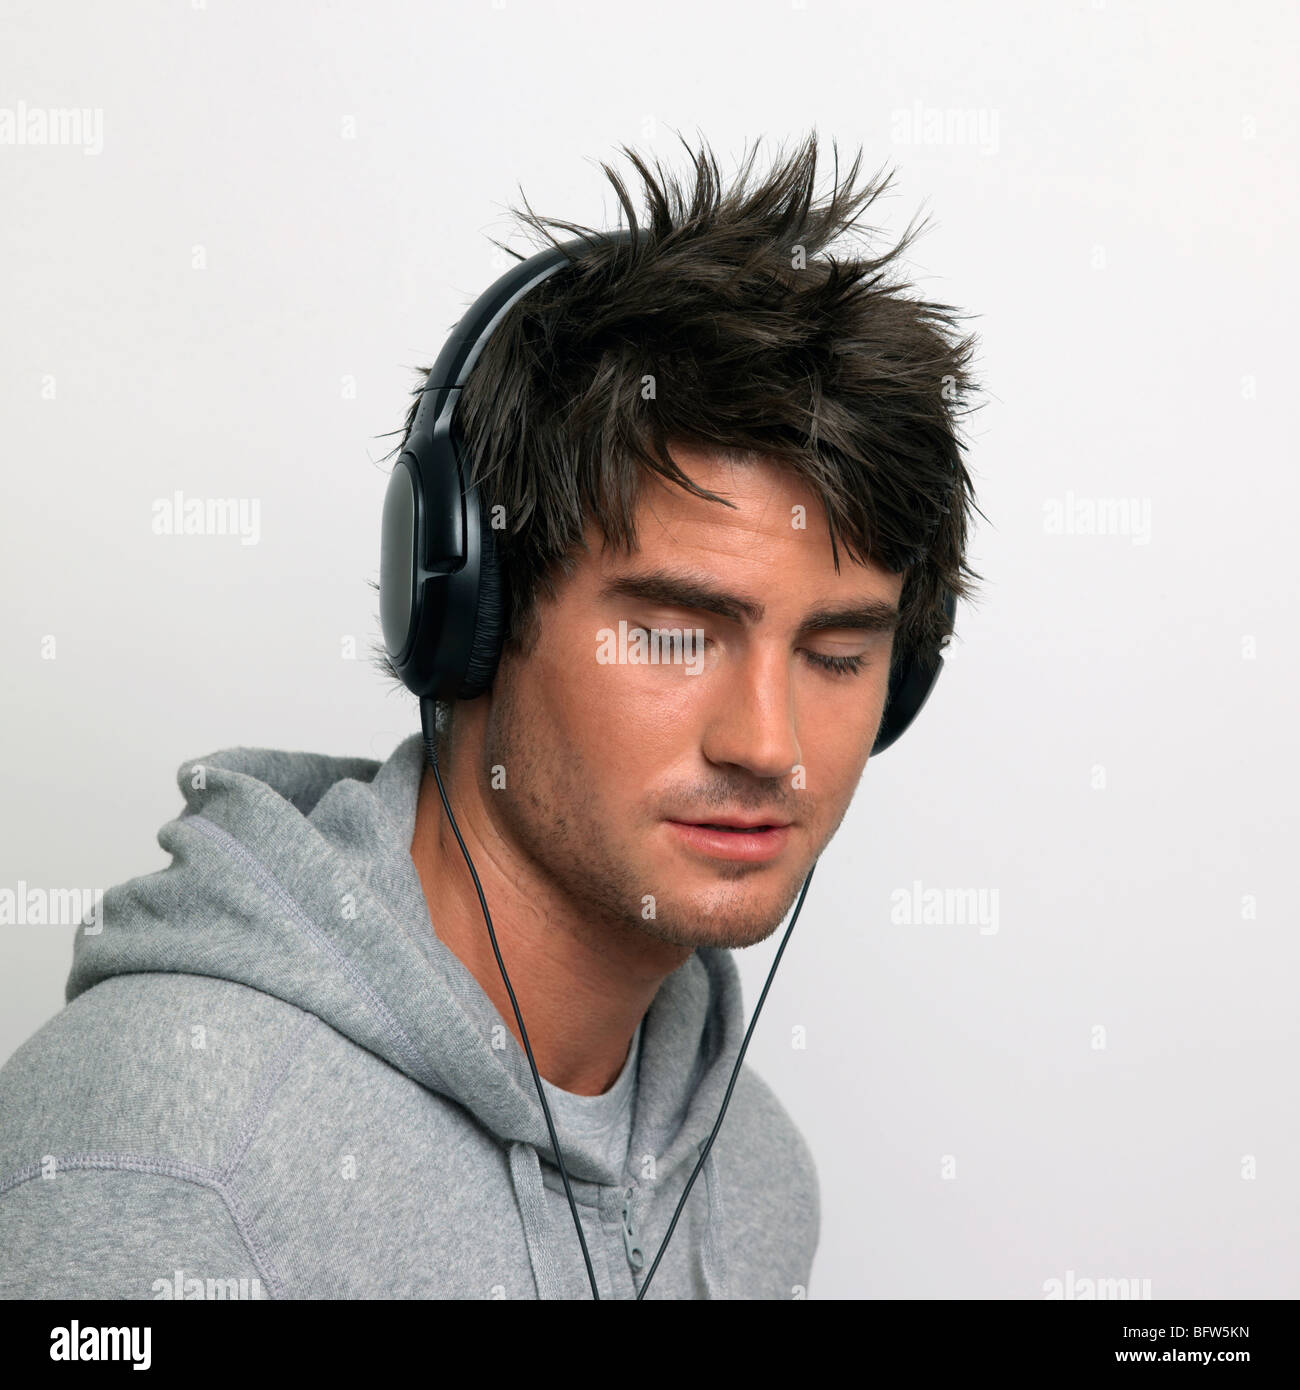 young man listening to music Stock Photo